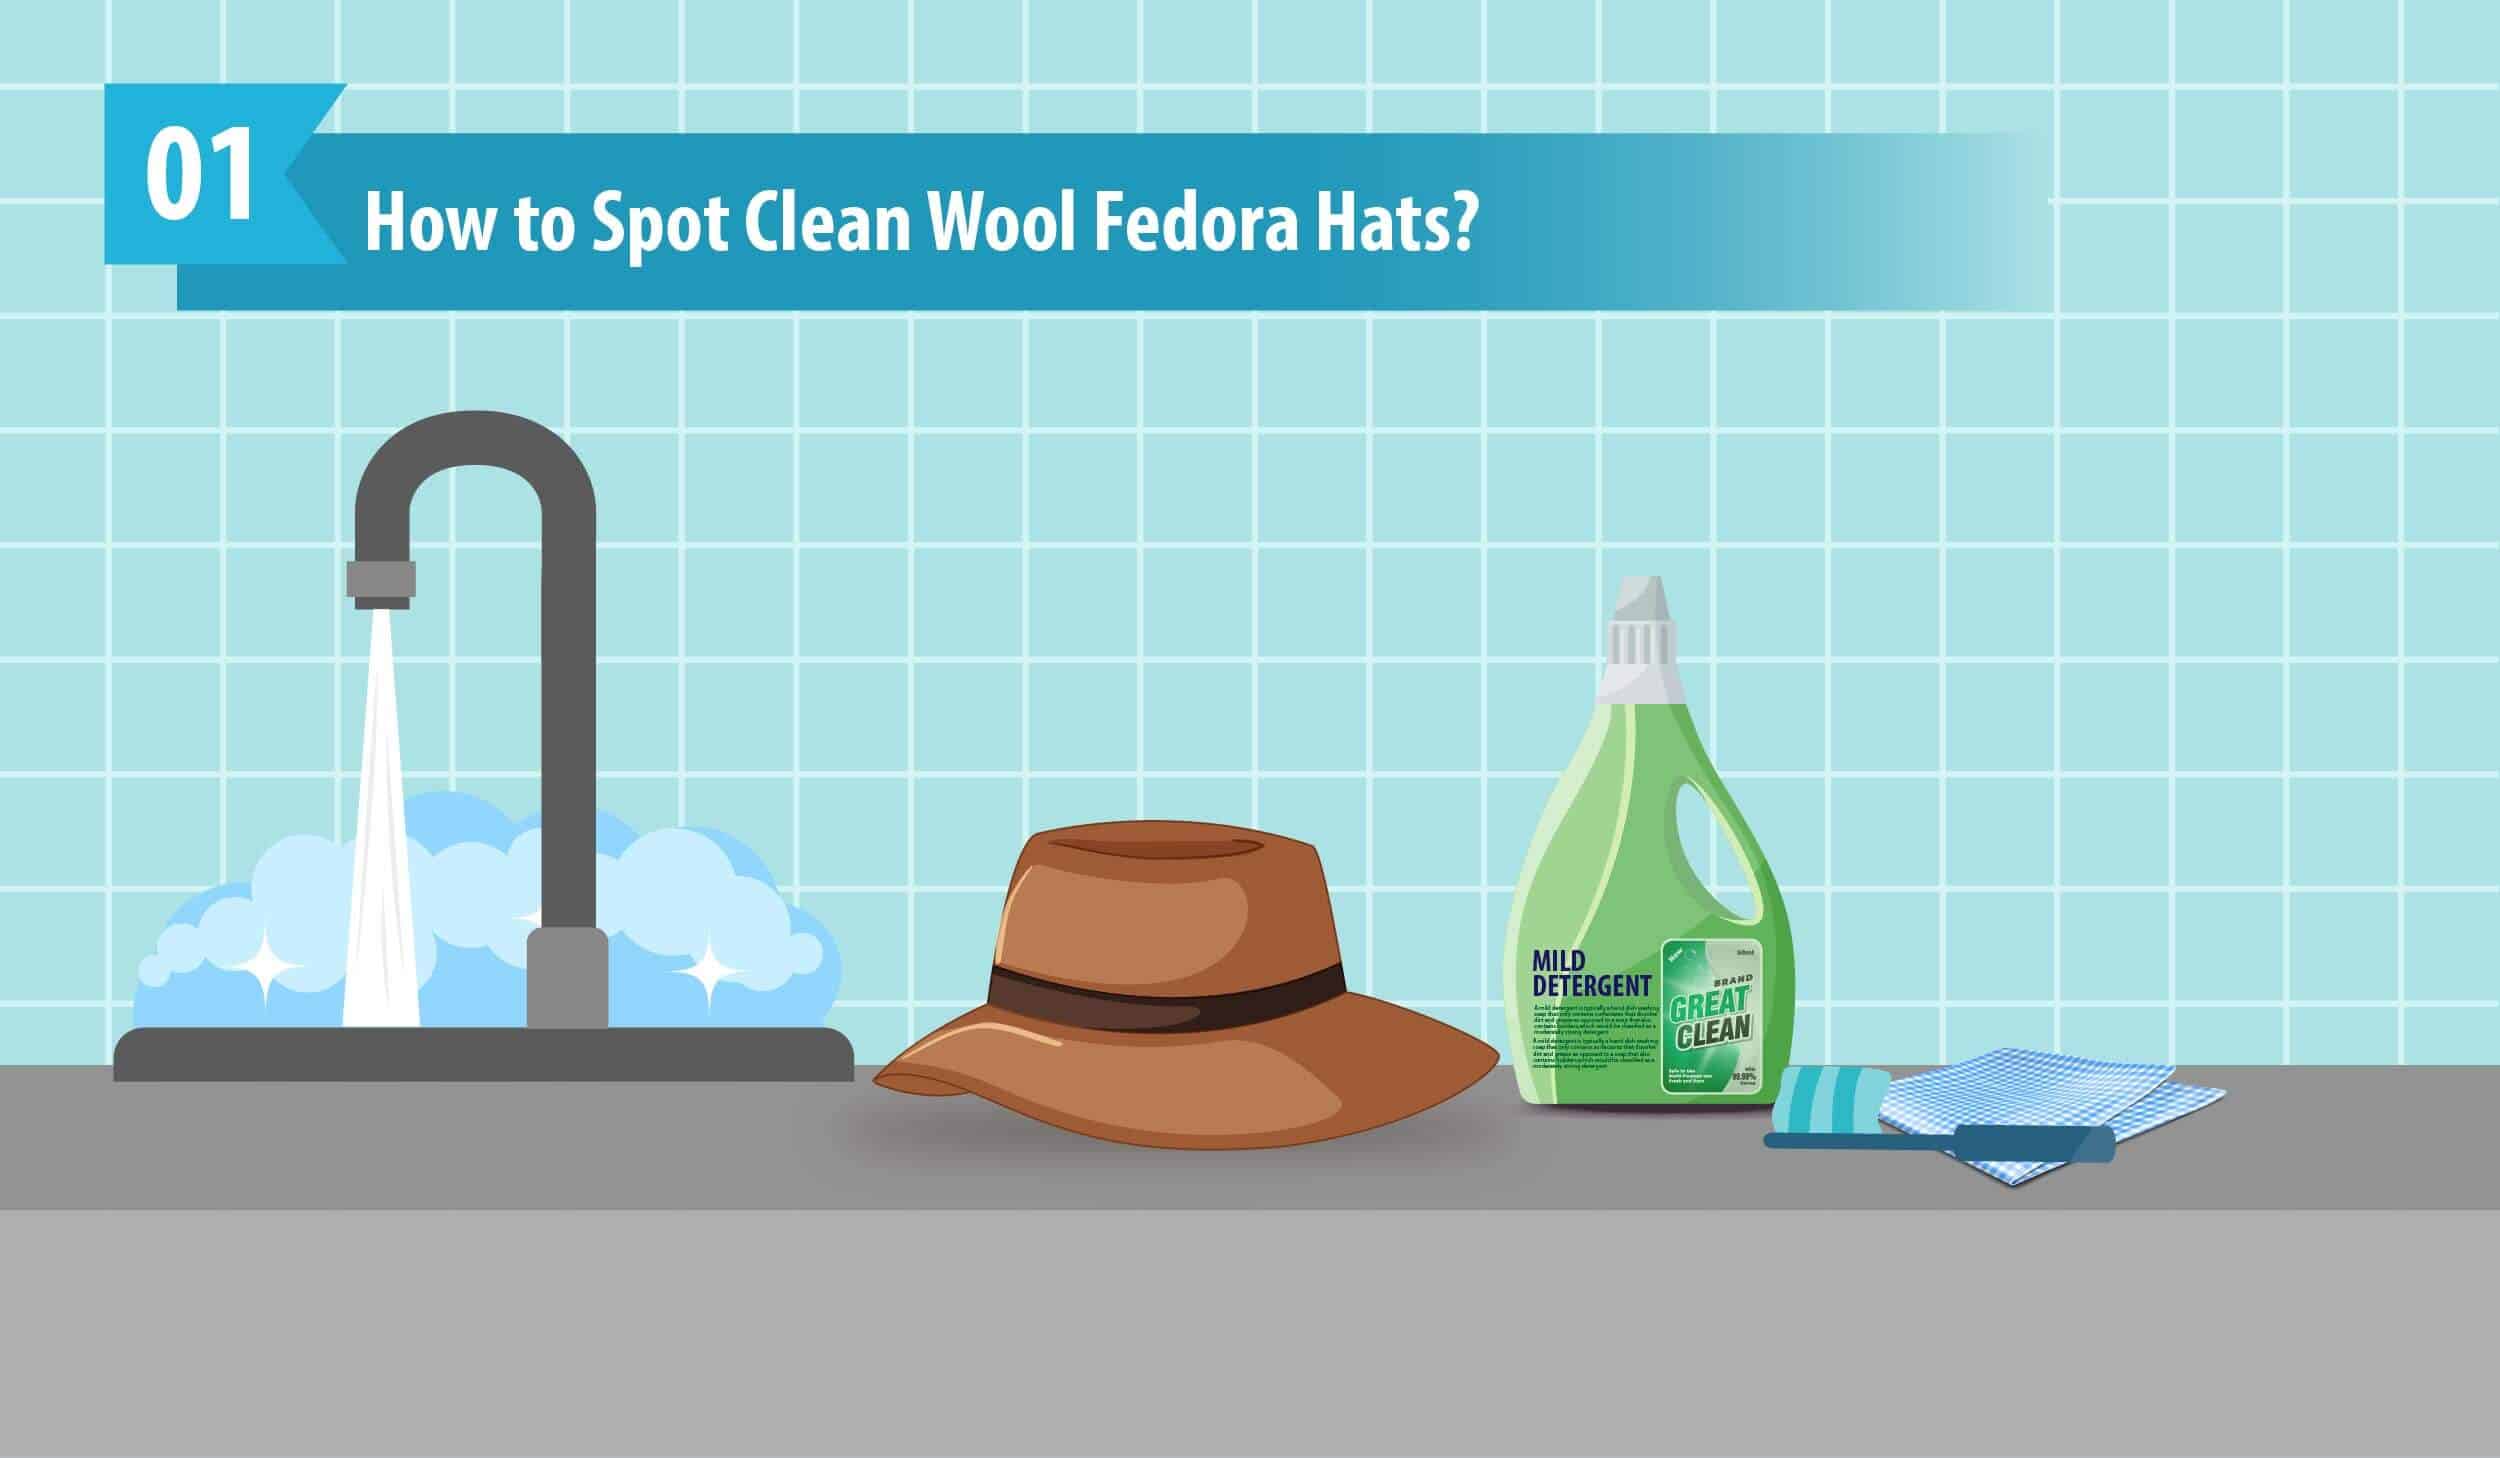 How to Spot Clean Wool Fedora Hats